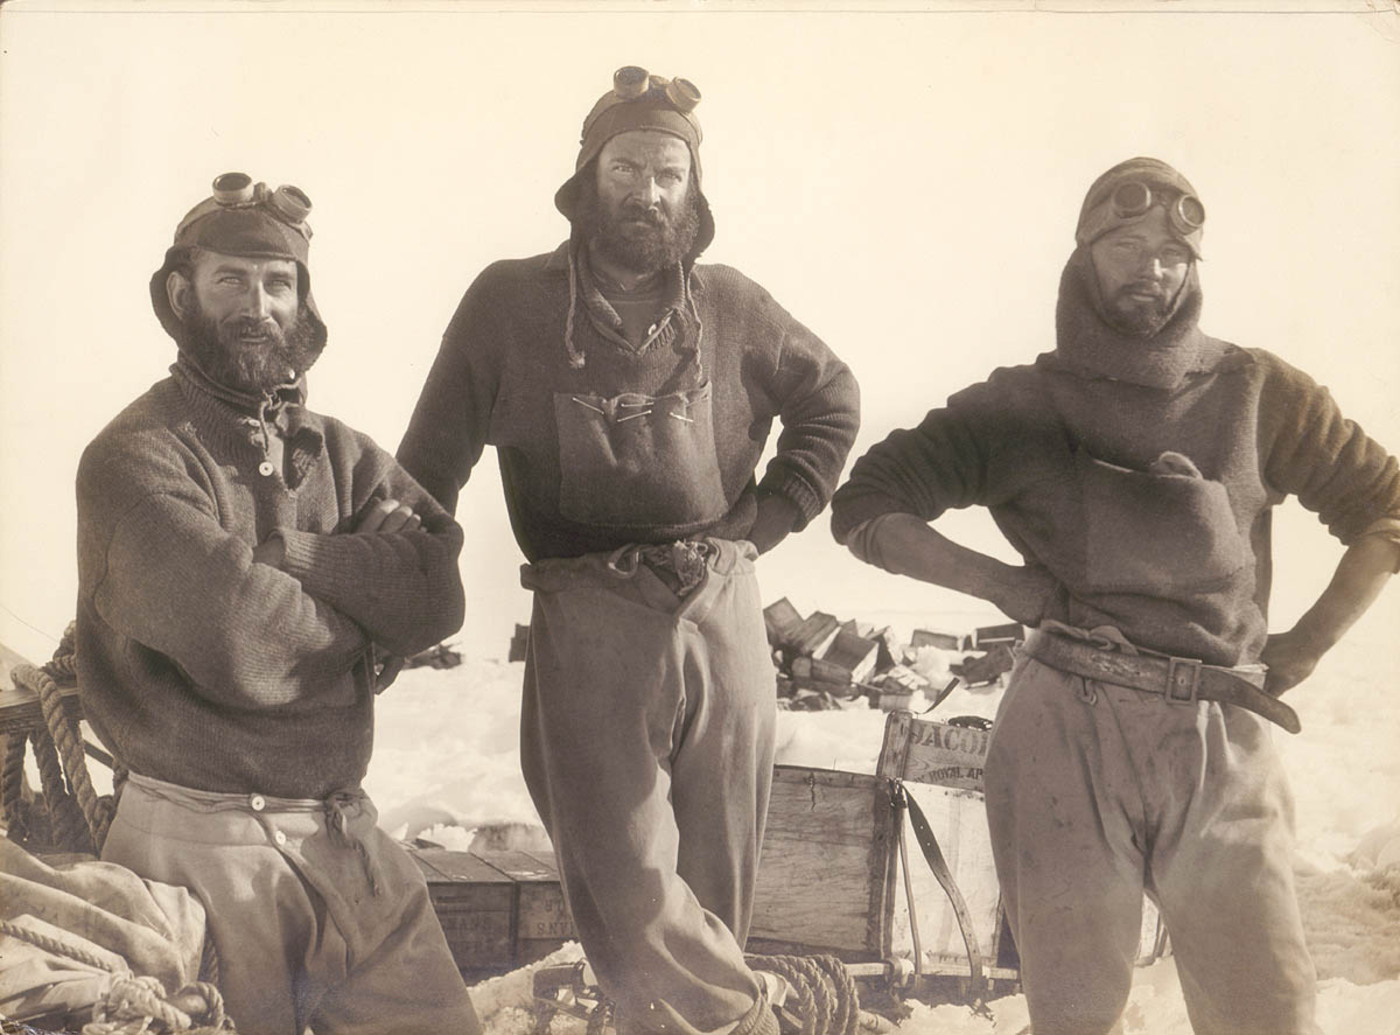 photograph-from-the-expedition-group-portrait-1911-1914_6438930265_o.jpg